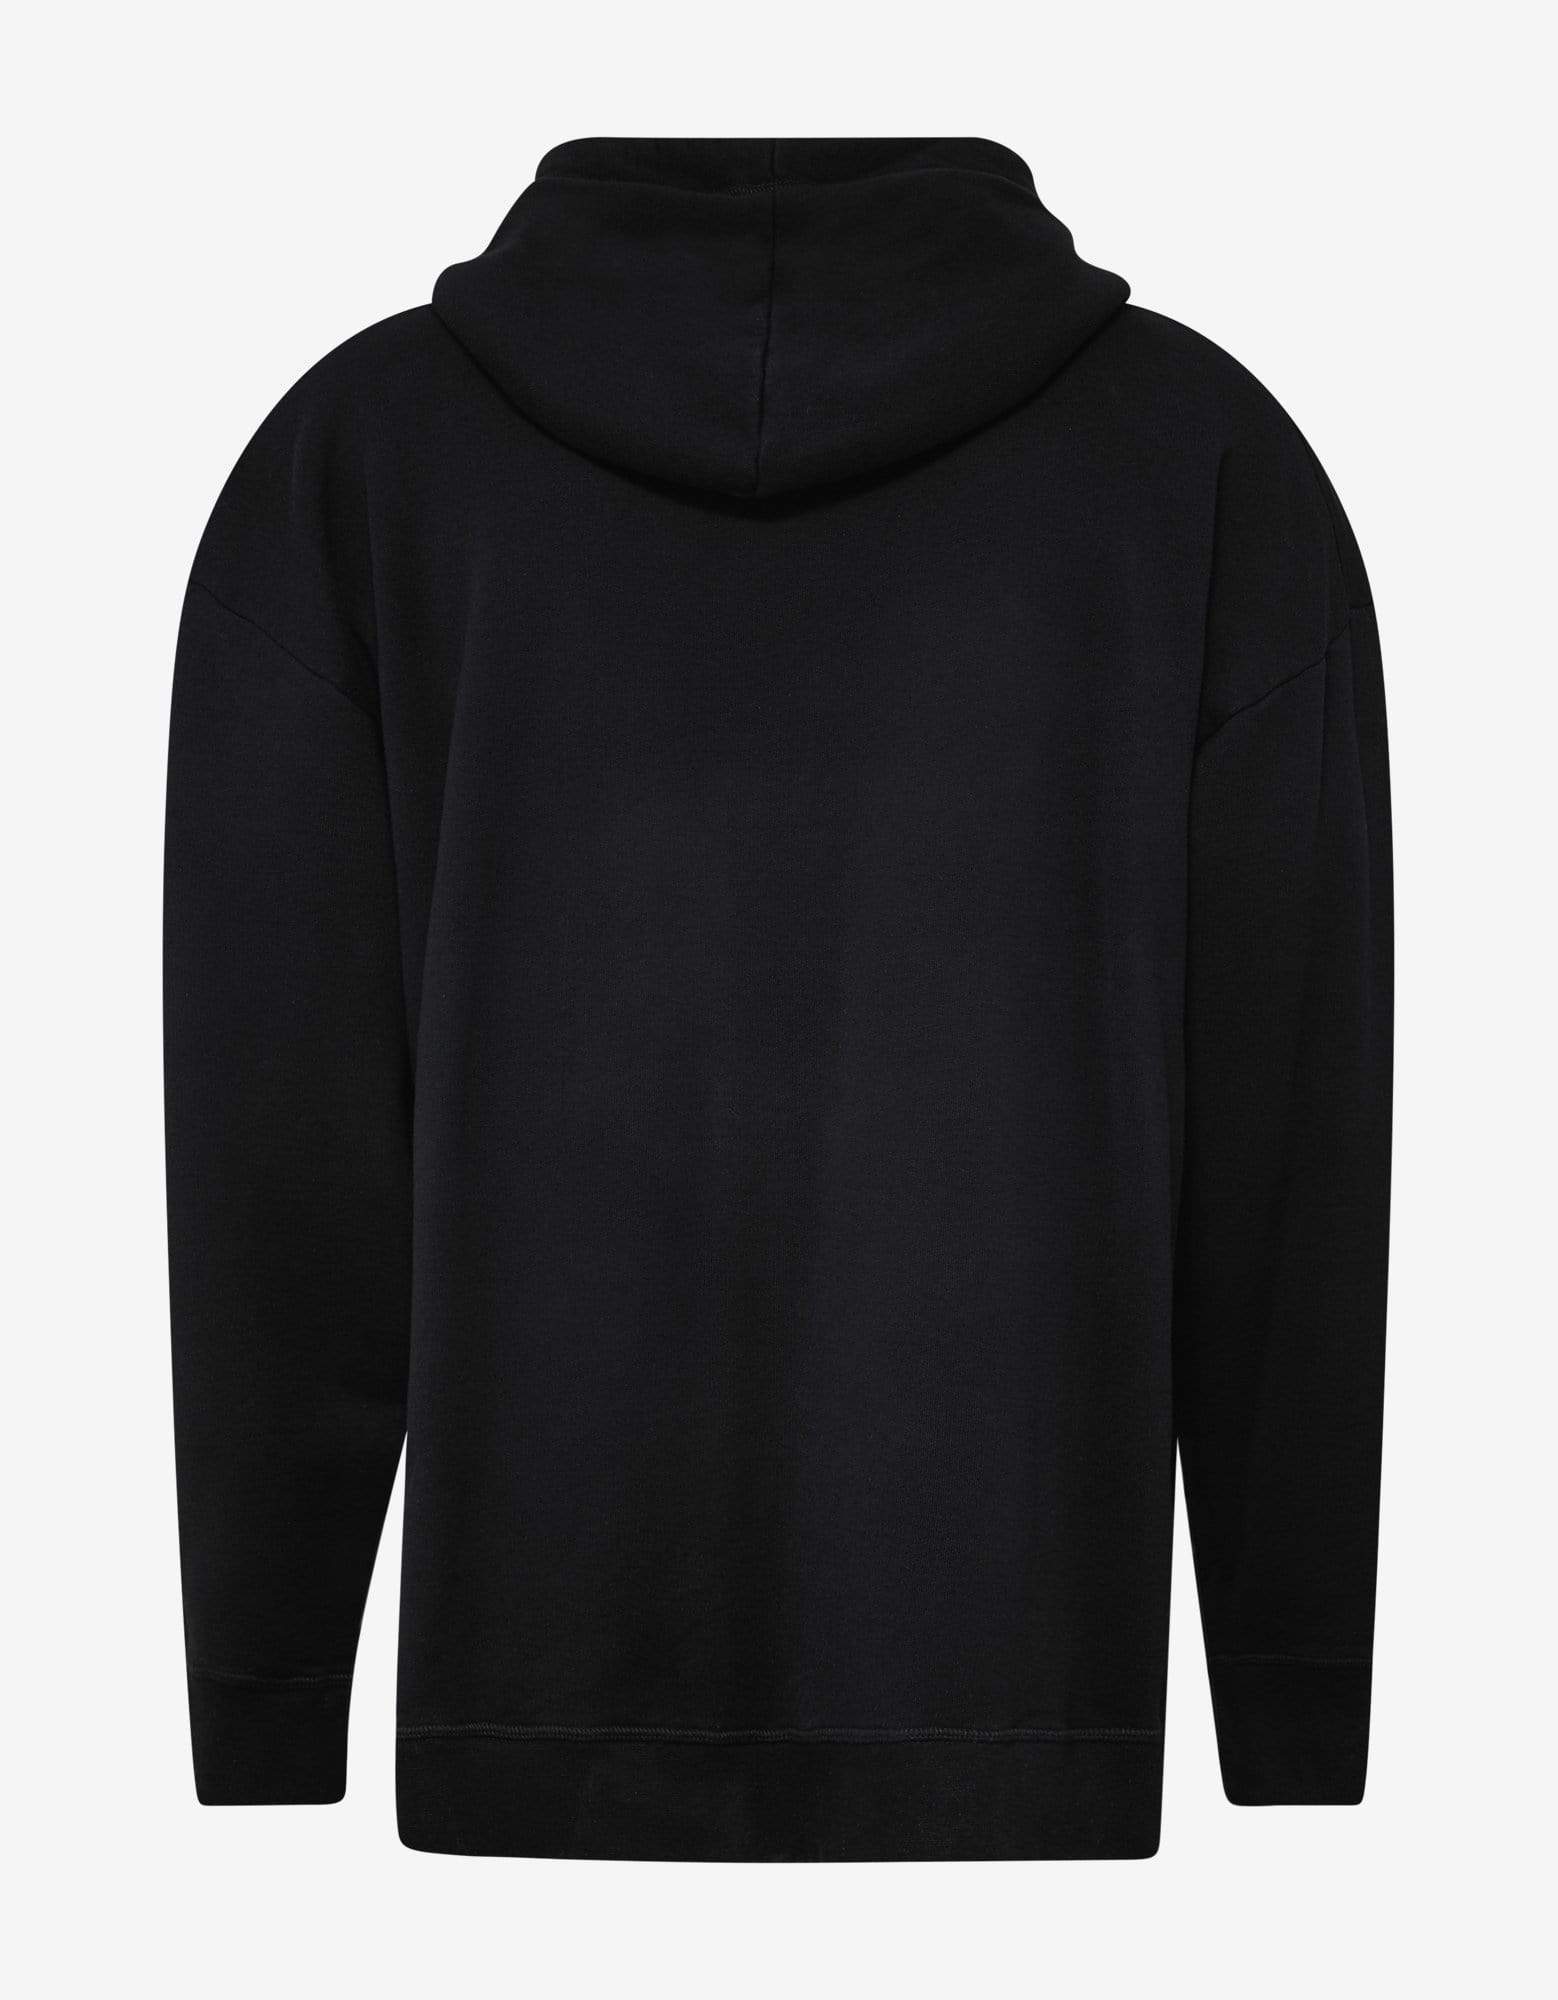 Dsquared2 Black Neon Panelled Hoodie